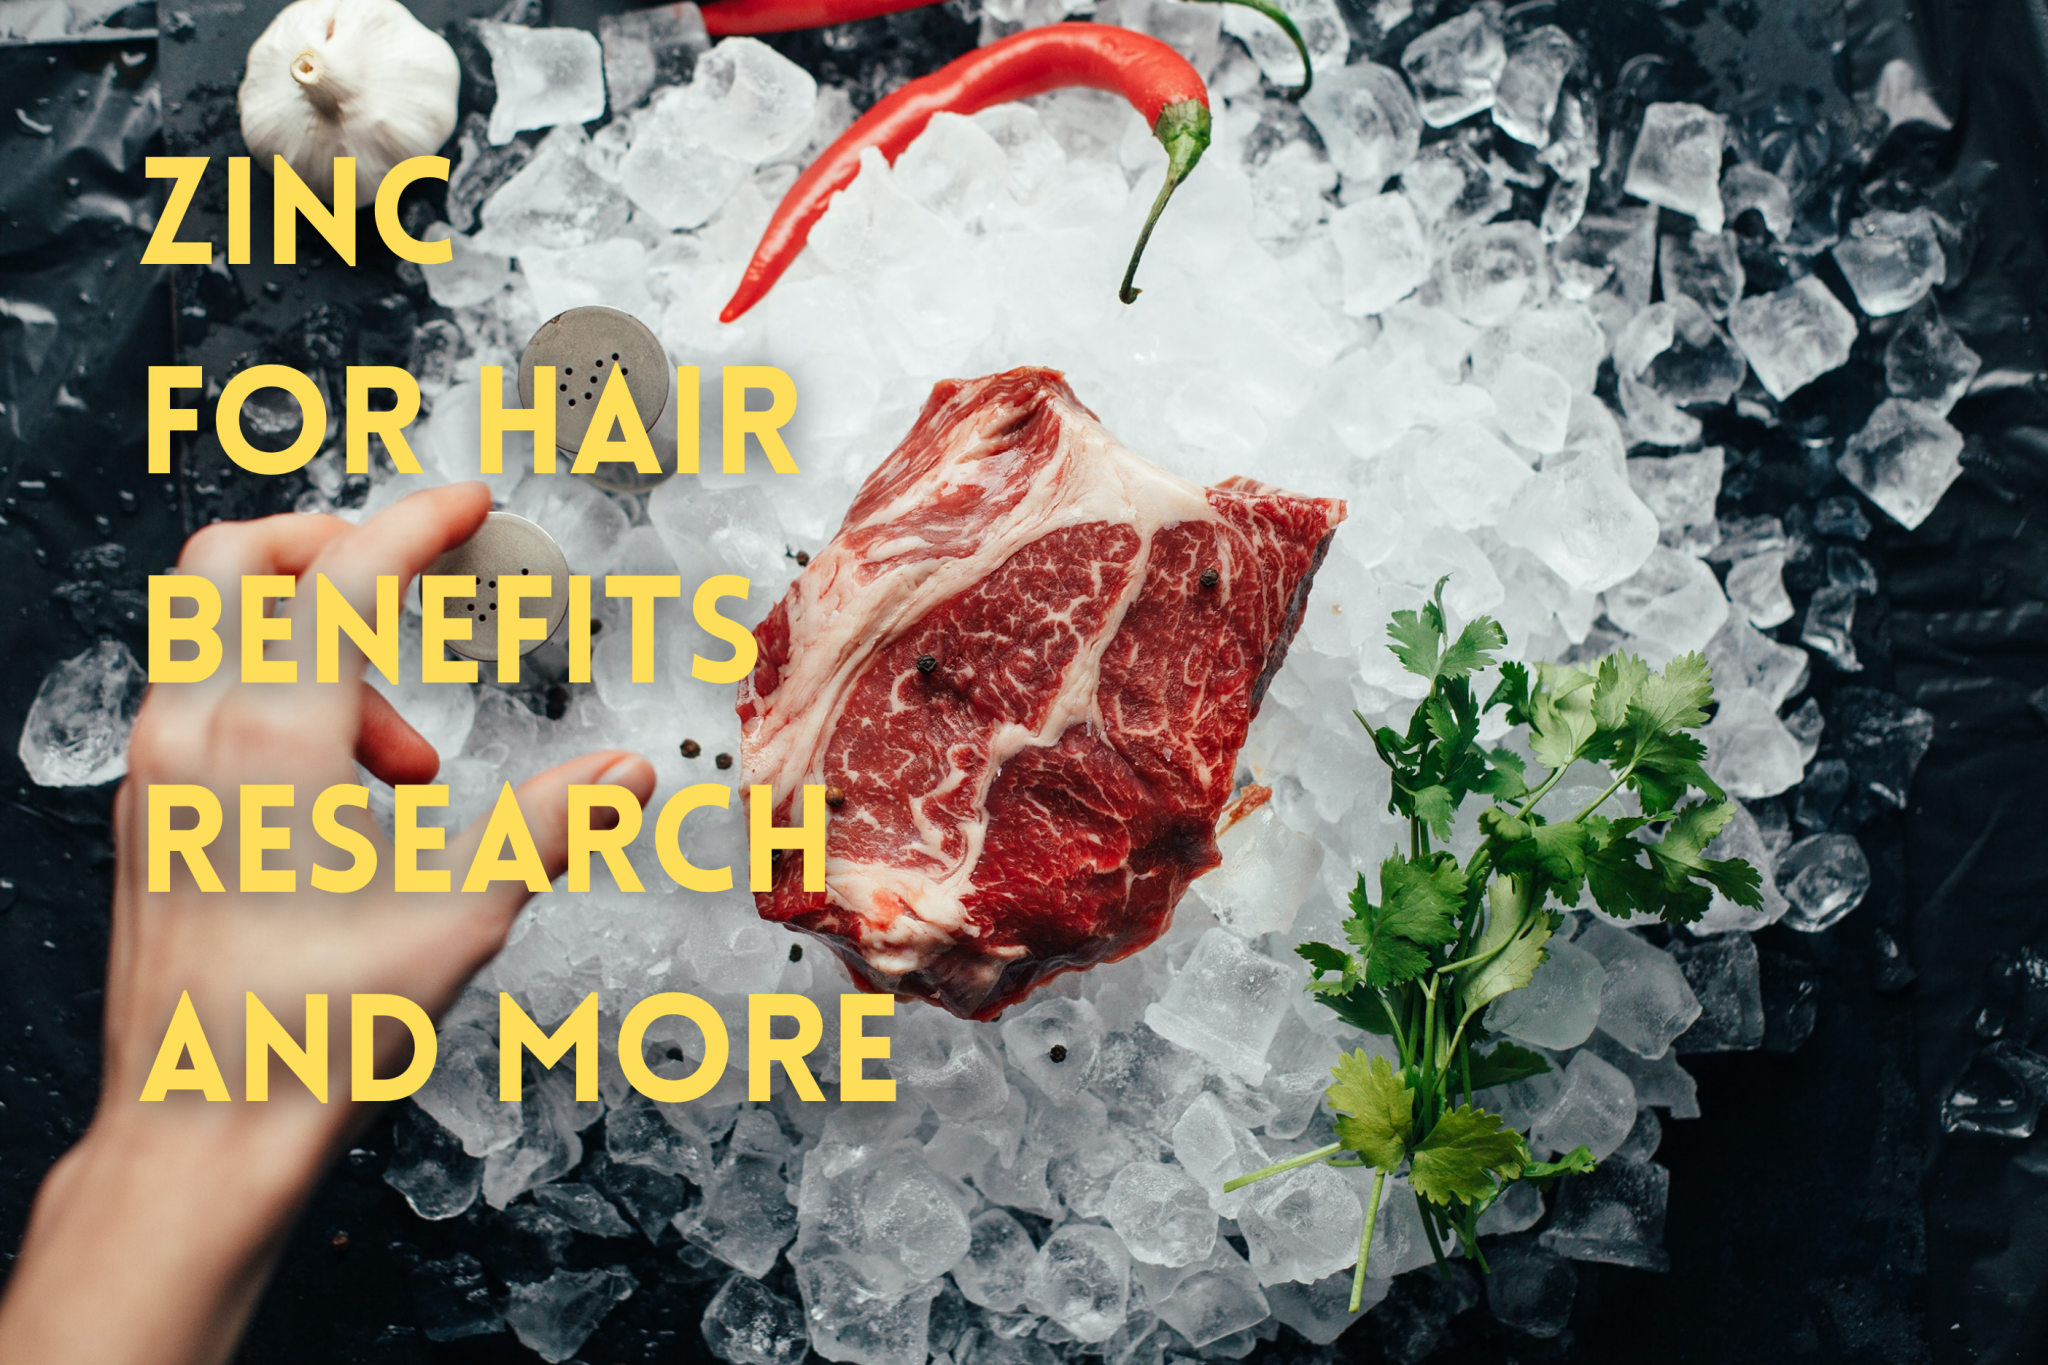 Zinc can be found in red meat and can possibly help hair growth.